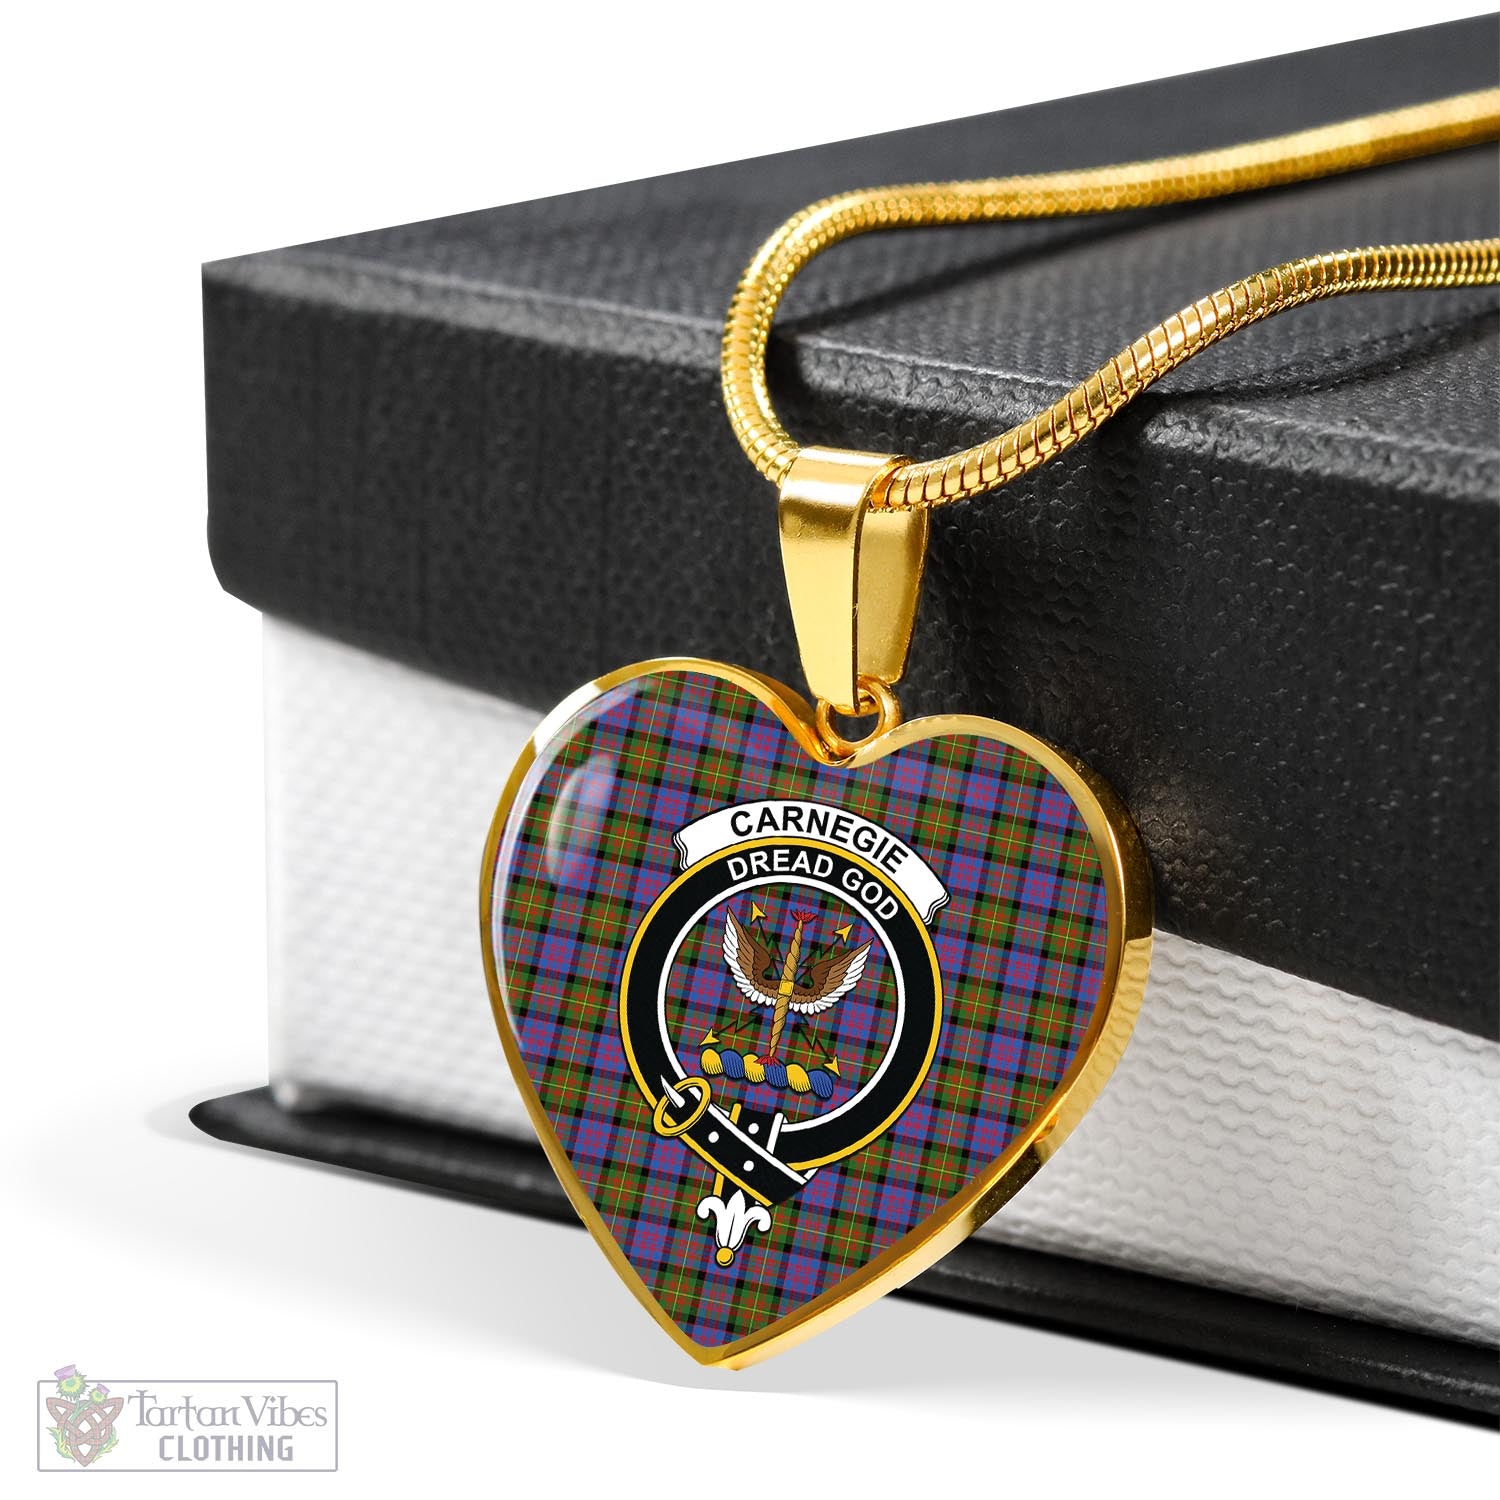 Tartan Vibes Clothing Carnegie Ancient Tartan Heart Necklace with Family Crest